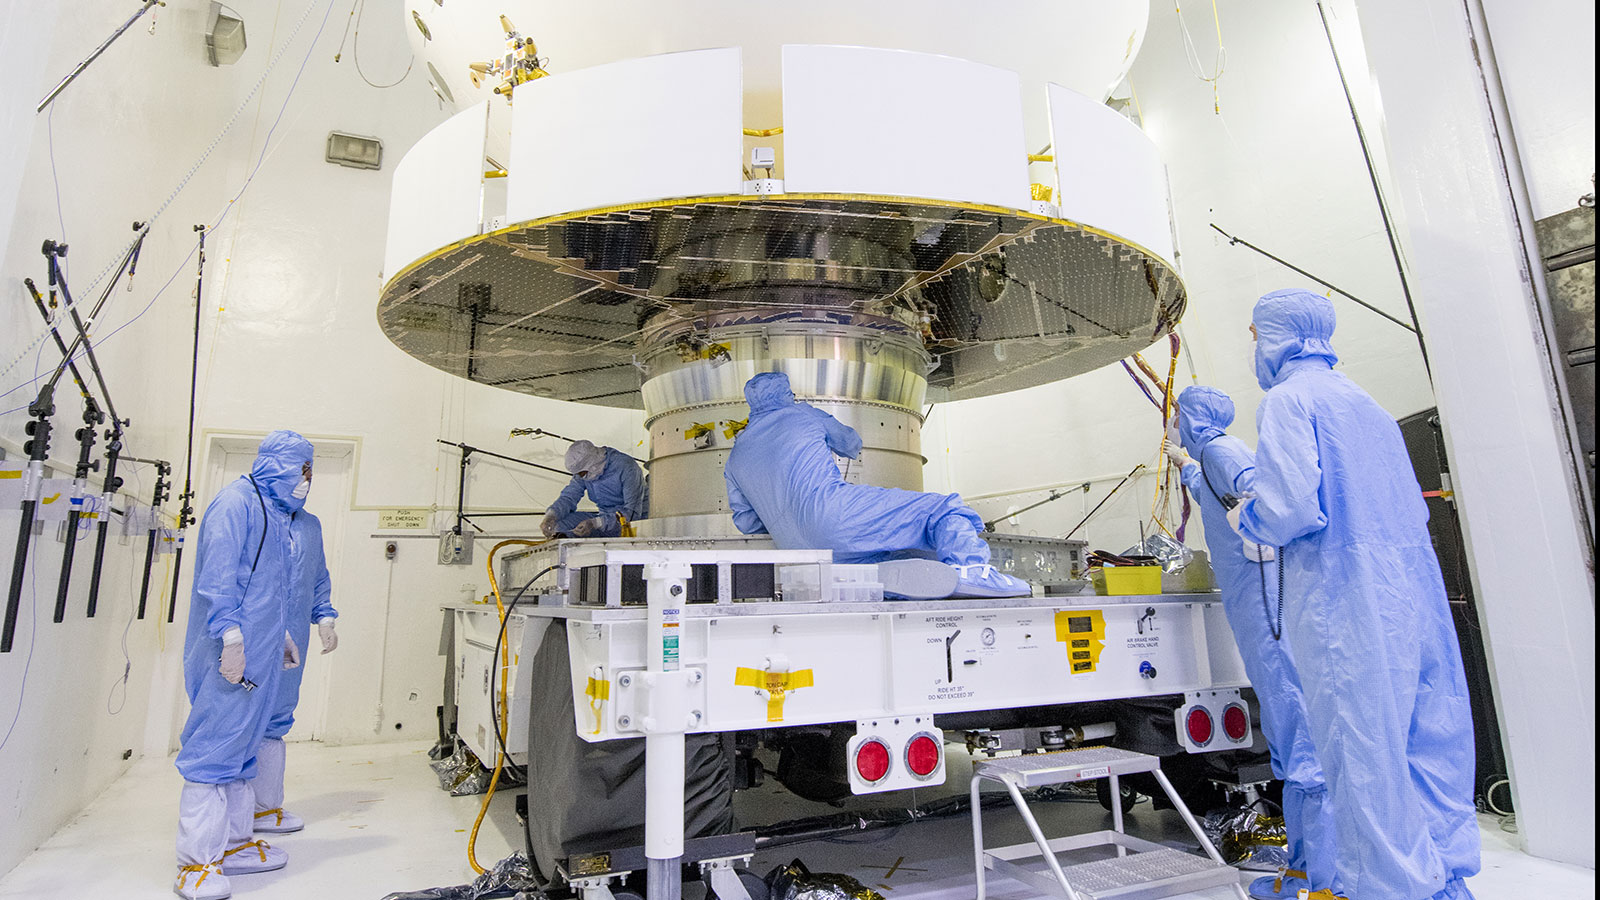 NASA's Mars 2020 spacecraft undergoes examination prior to an acoustic test